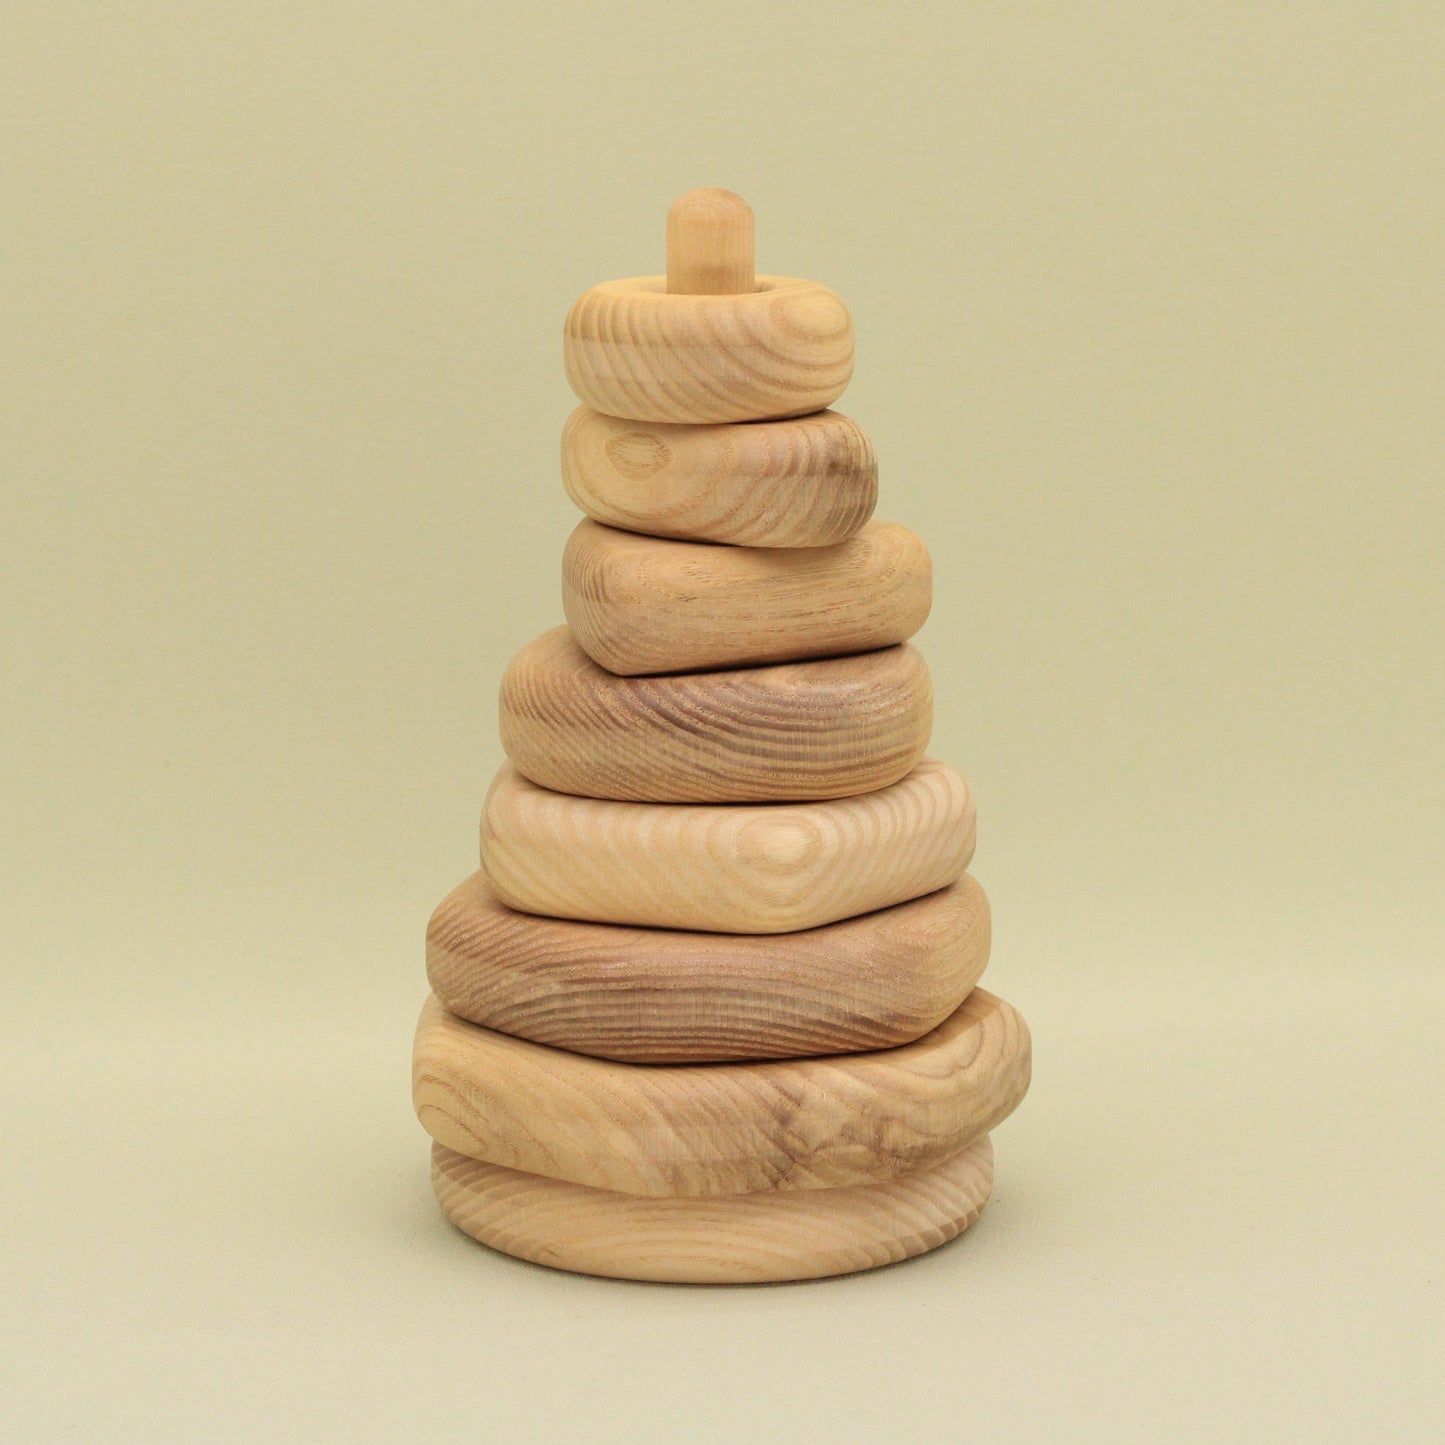 Lotes Toys Natural Geometric Wooden Stacking Pyramid - 7 pieces PY54